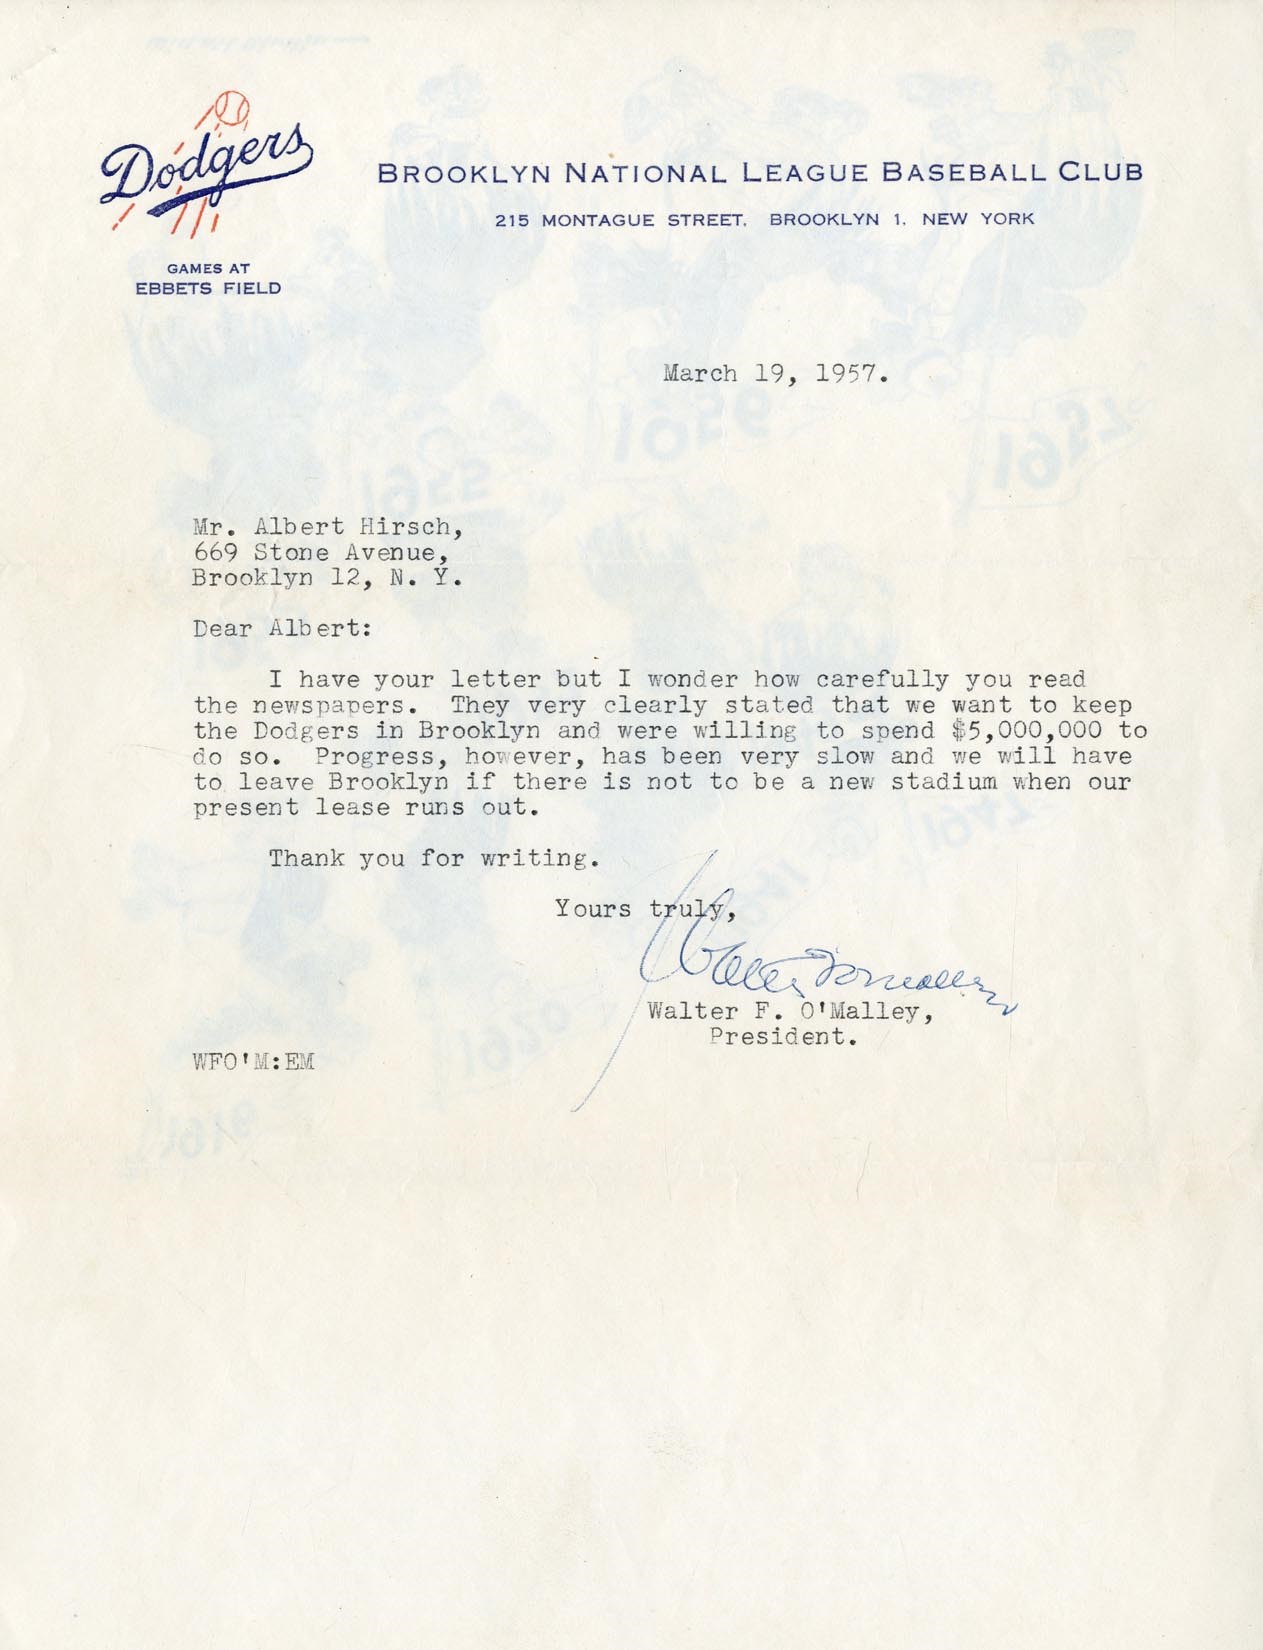 - 1957 Walter O'Malley "Keep the Dodgers in Brooklyn" Letter